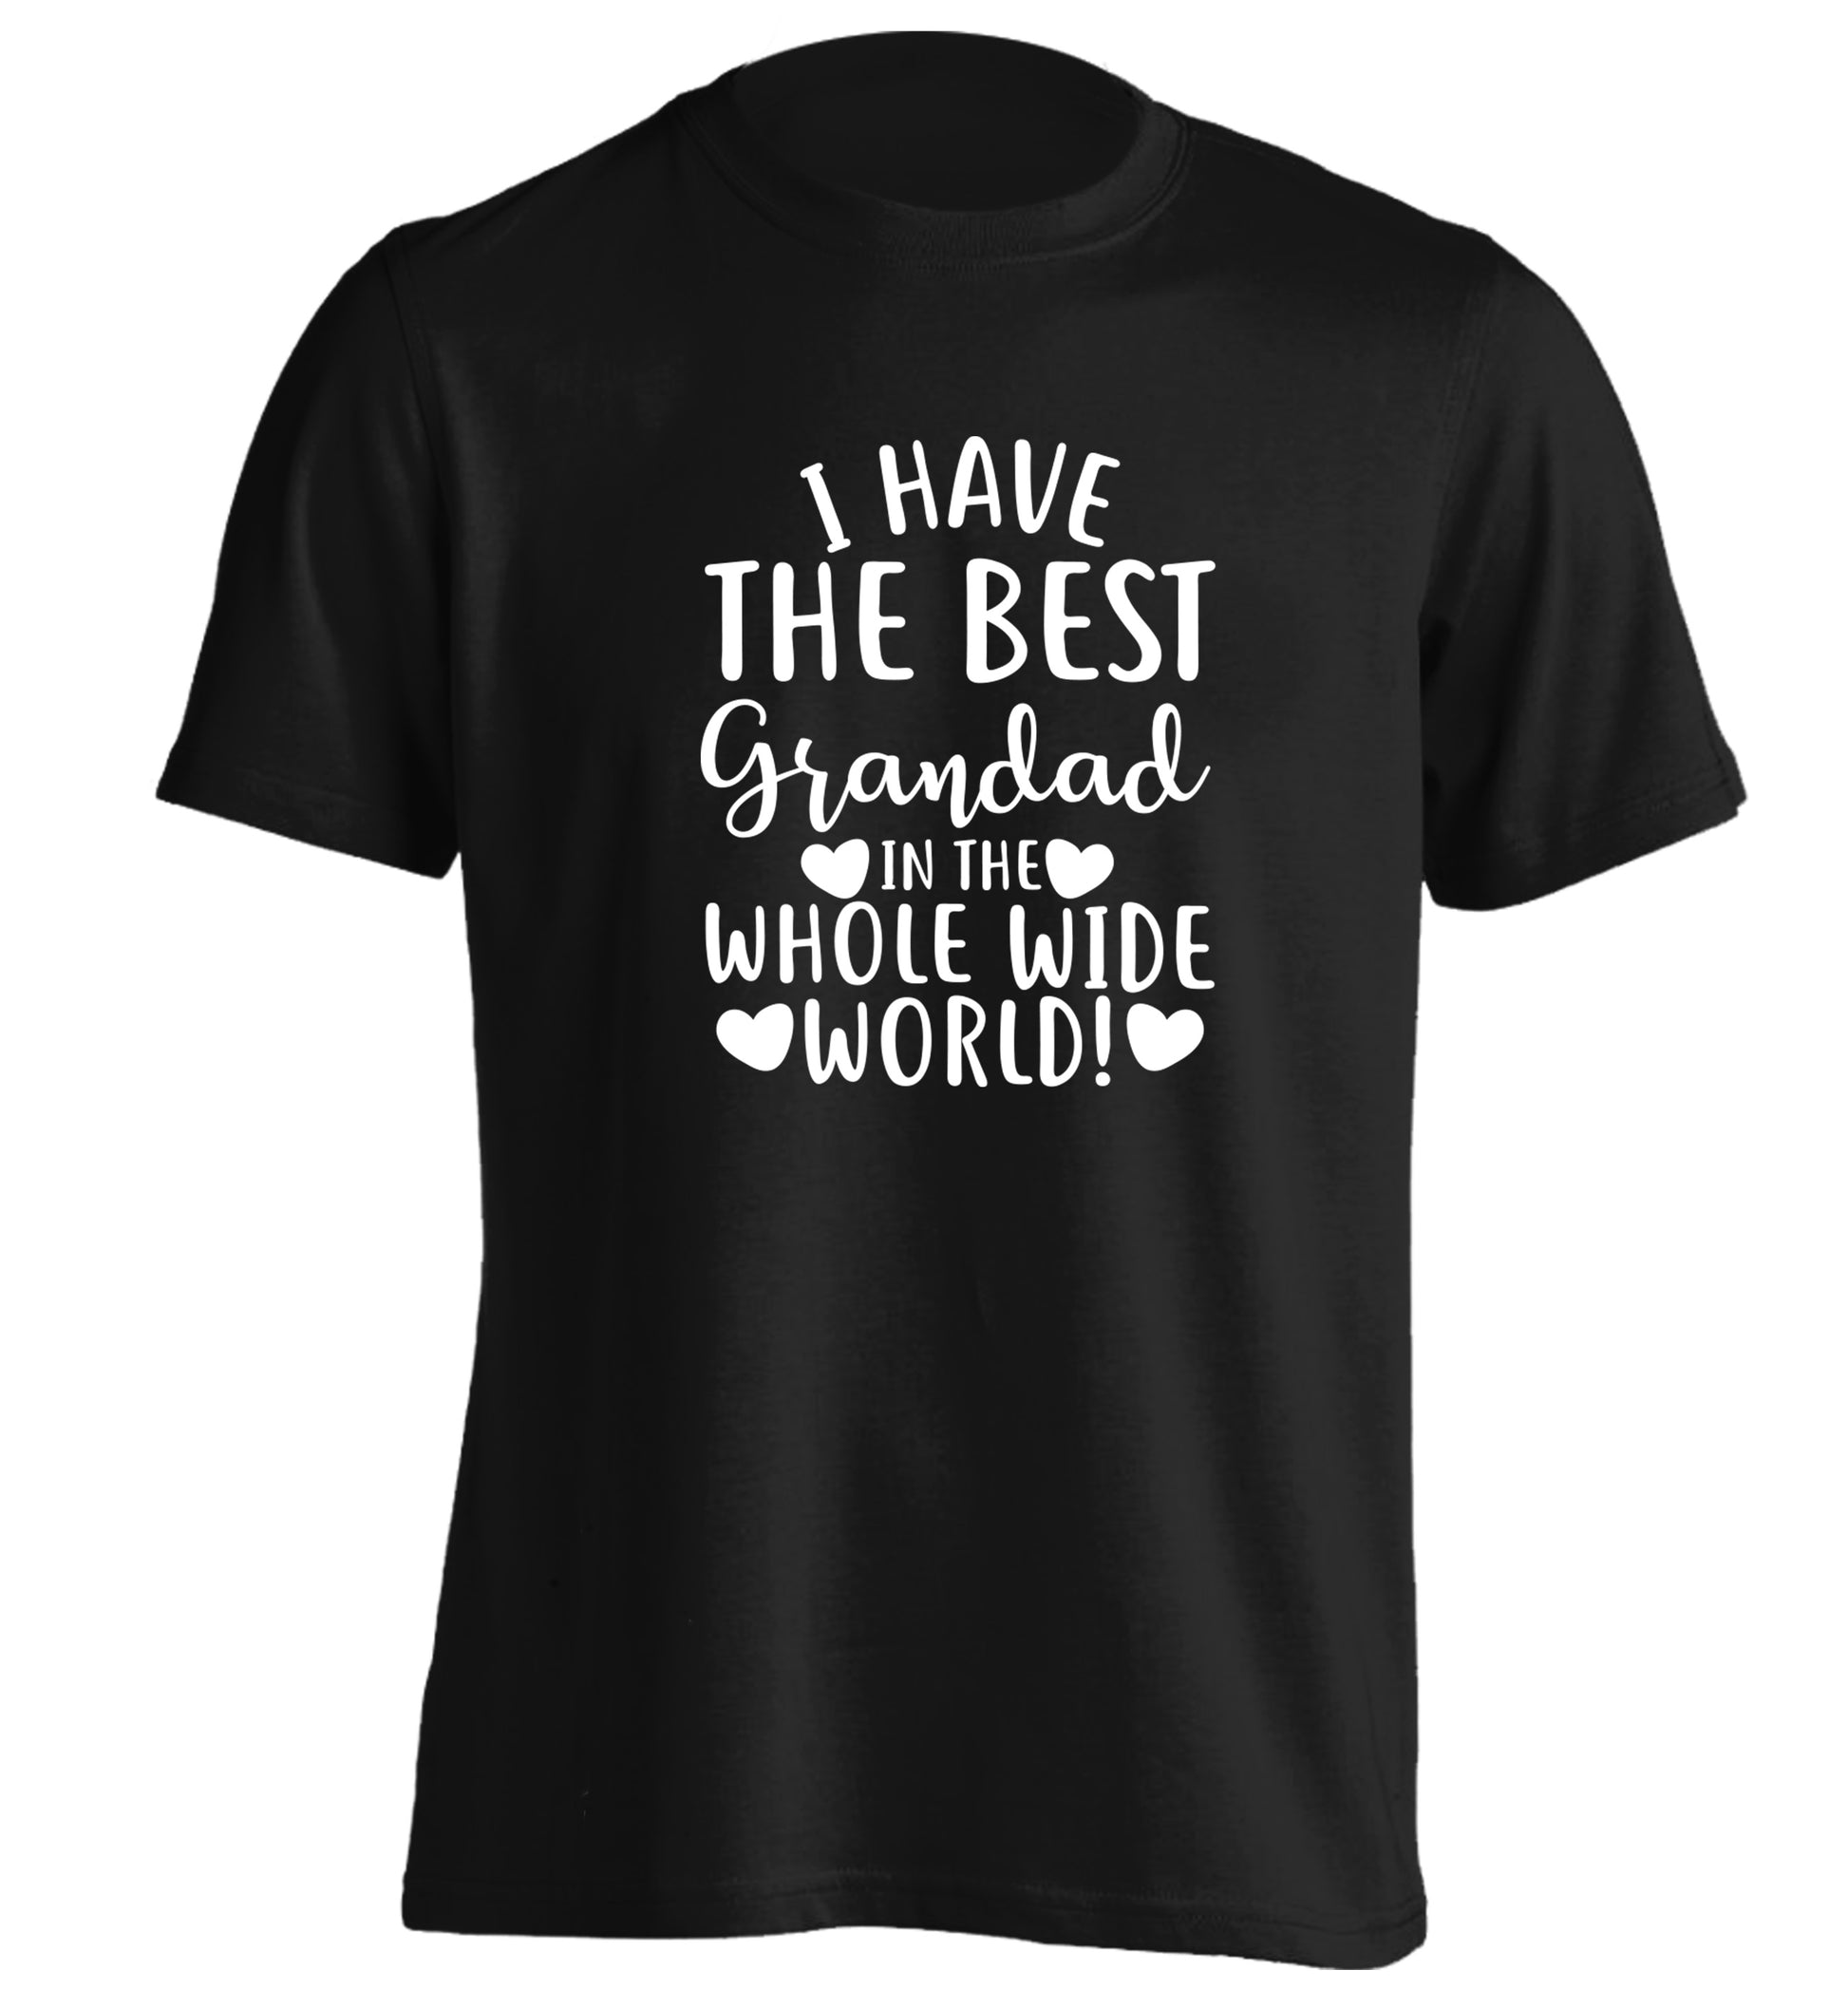 I have the best grandad in the whole wide world! adults unisex black Tshirt 2XL